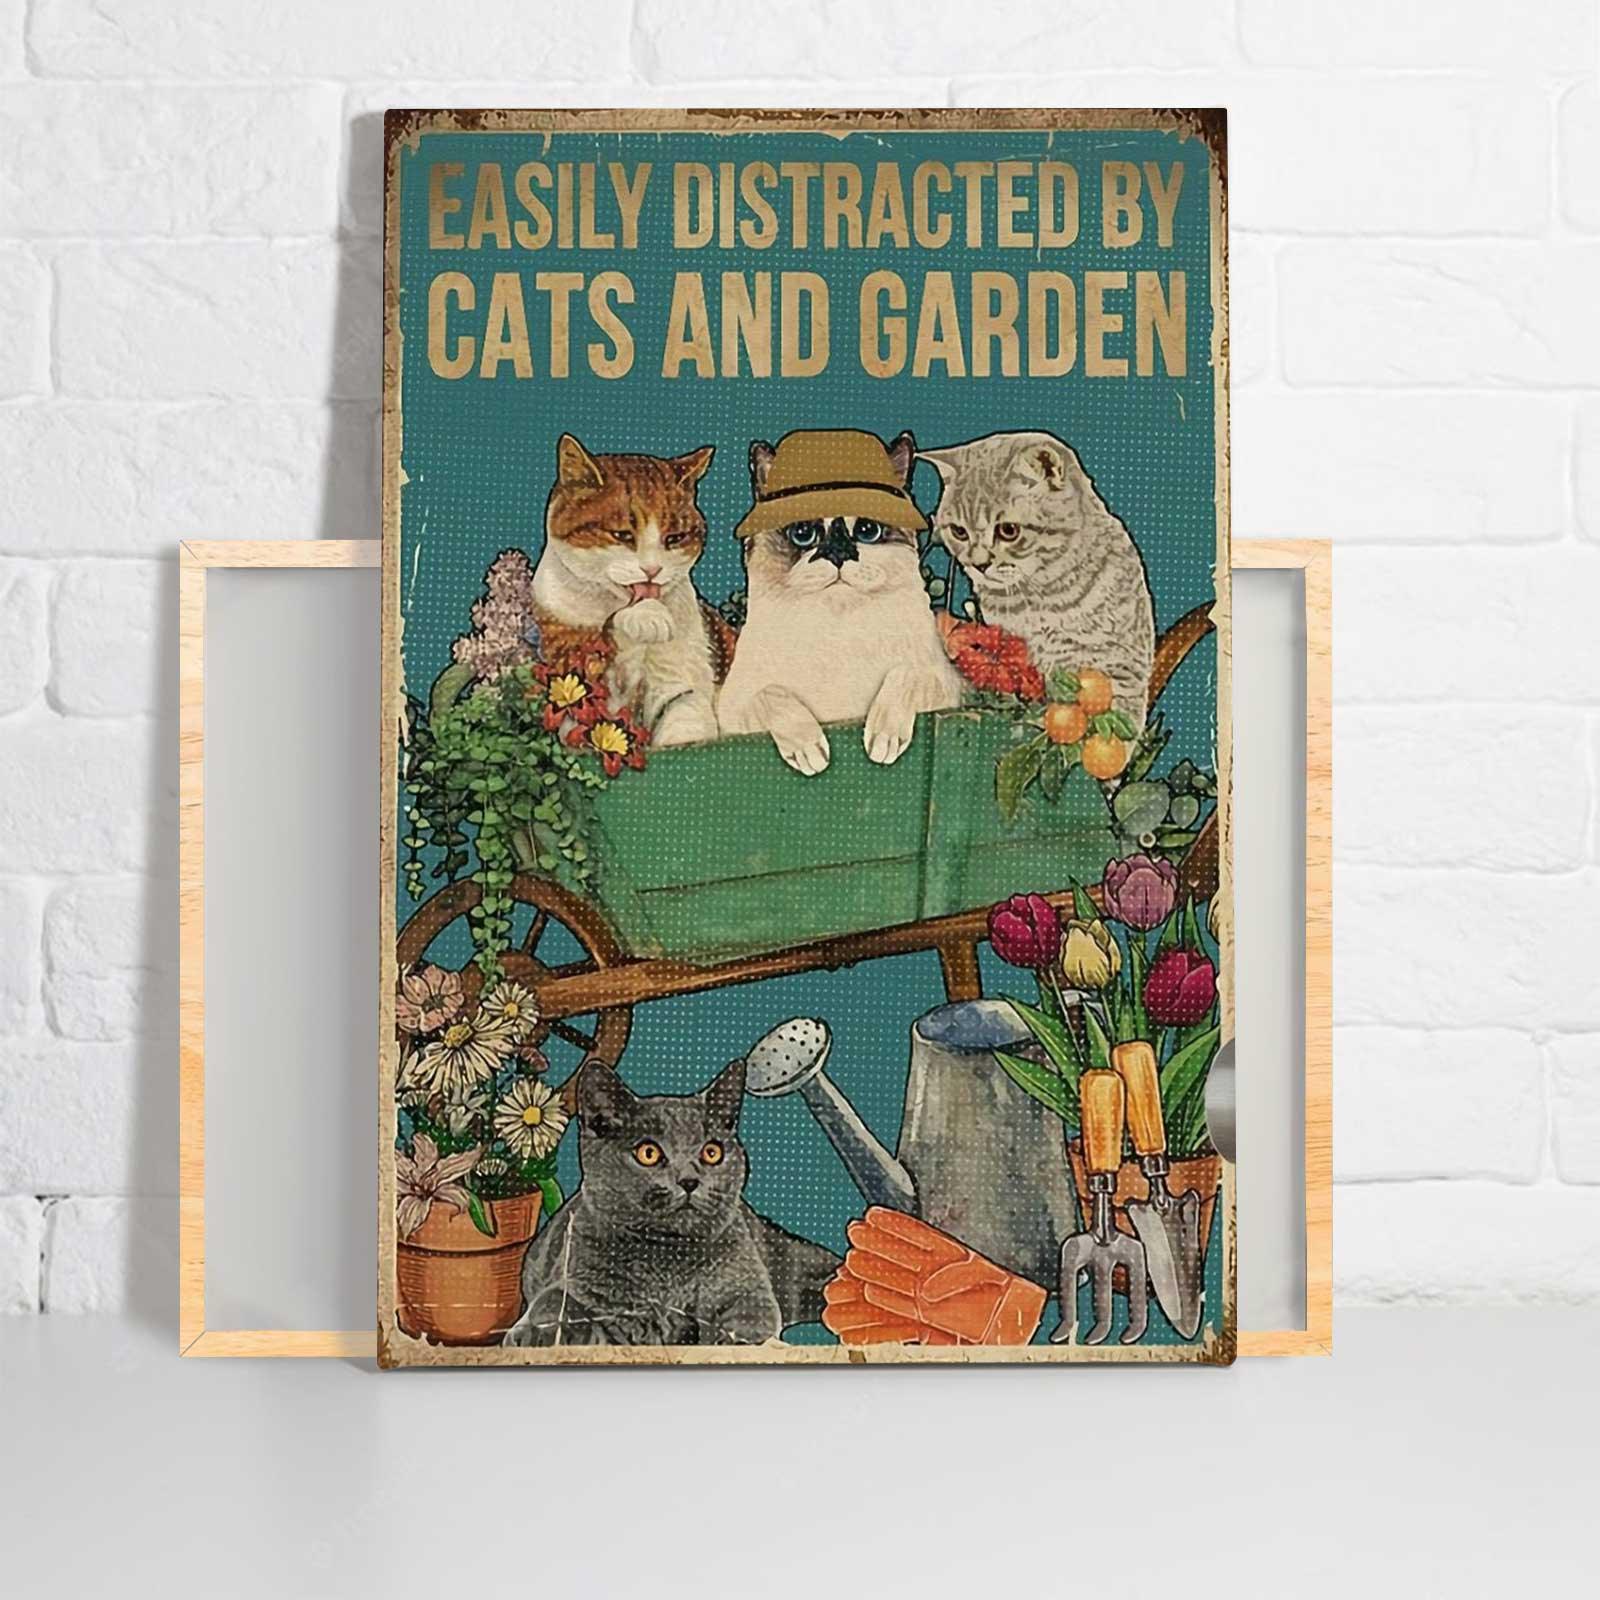 Cat Portrait Canvas, Cat Vintage Easily Distracted By Cats And Garden Portrait Canvas, Wall Decor Visual Art - Perfect Gift For Cat Lover - Amzanimalsgift